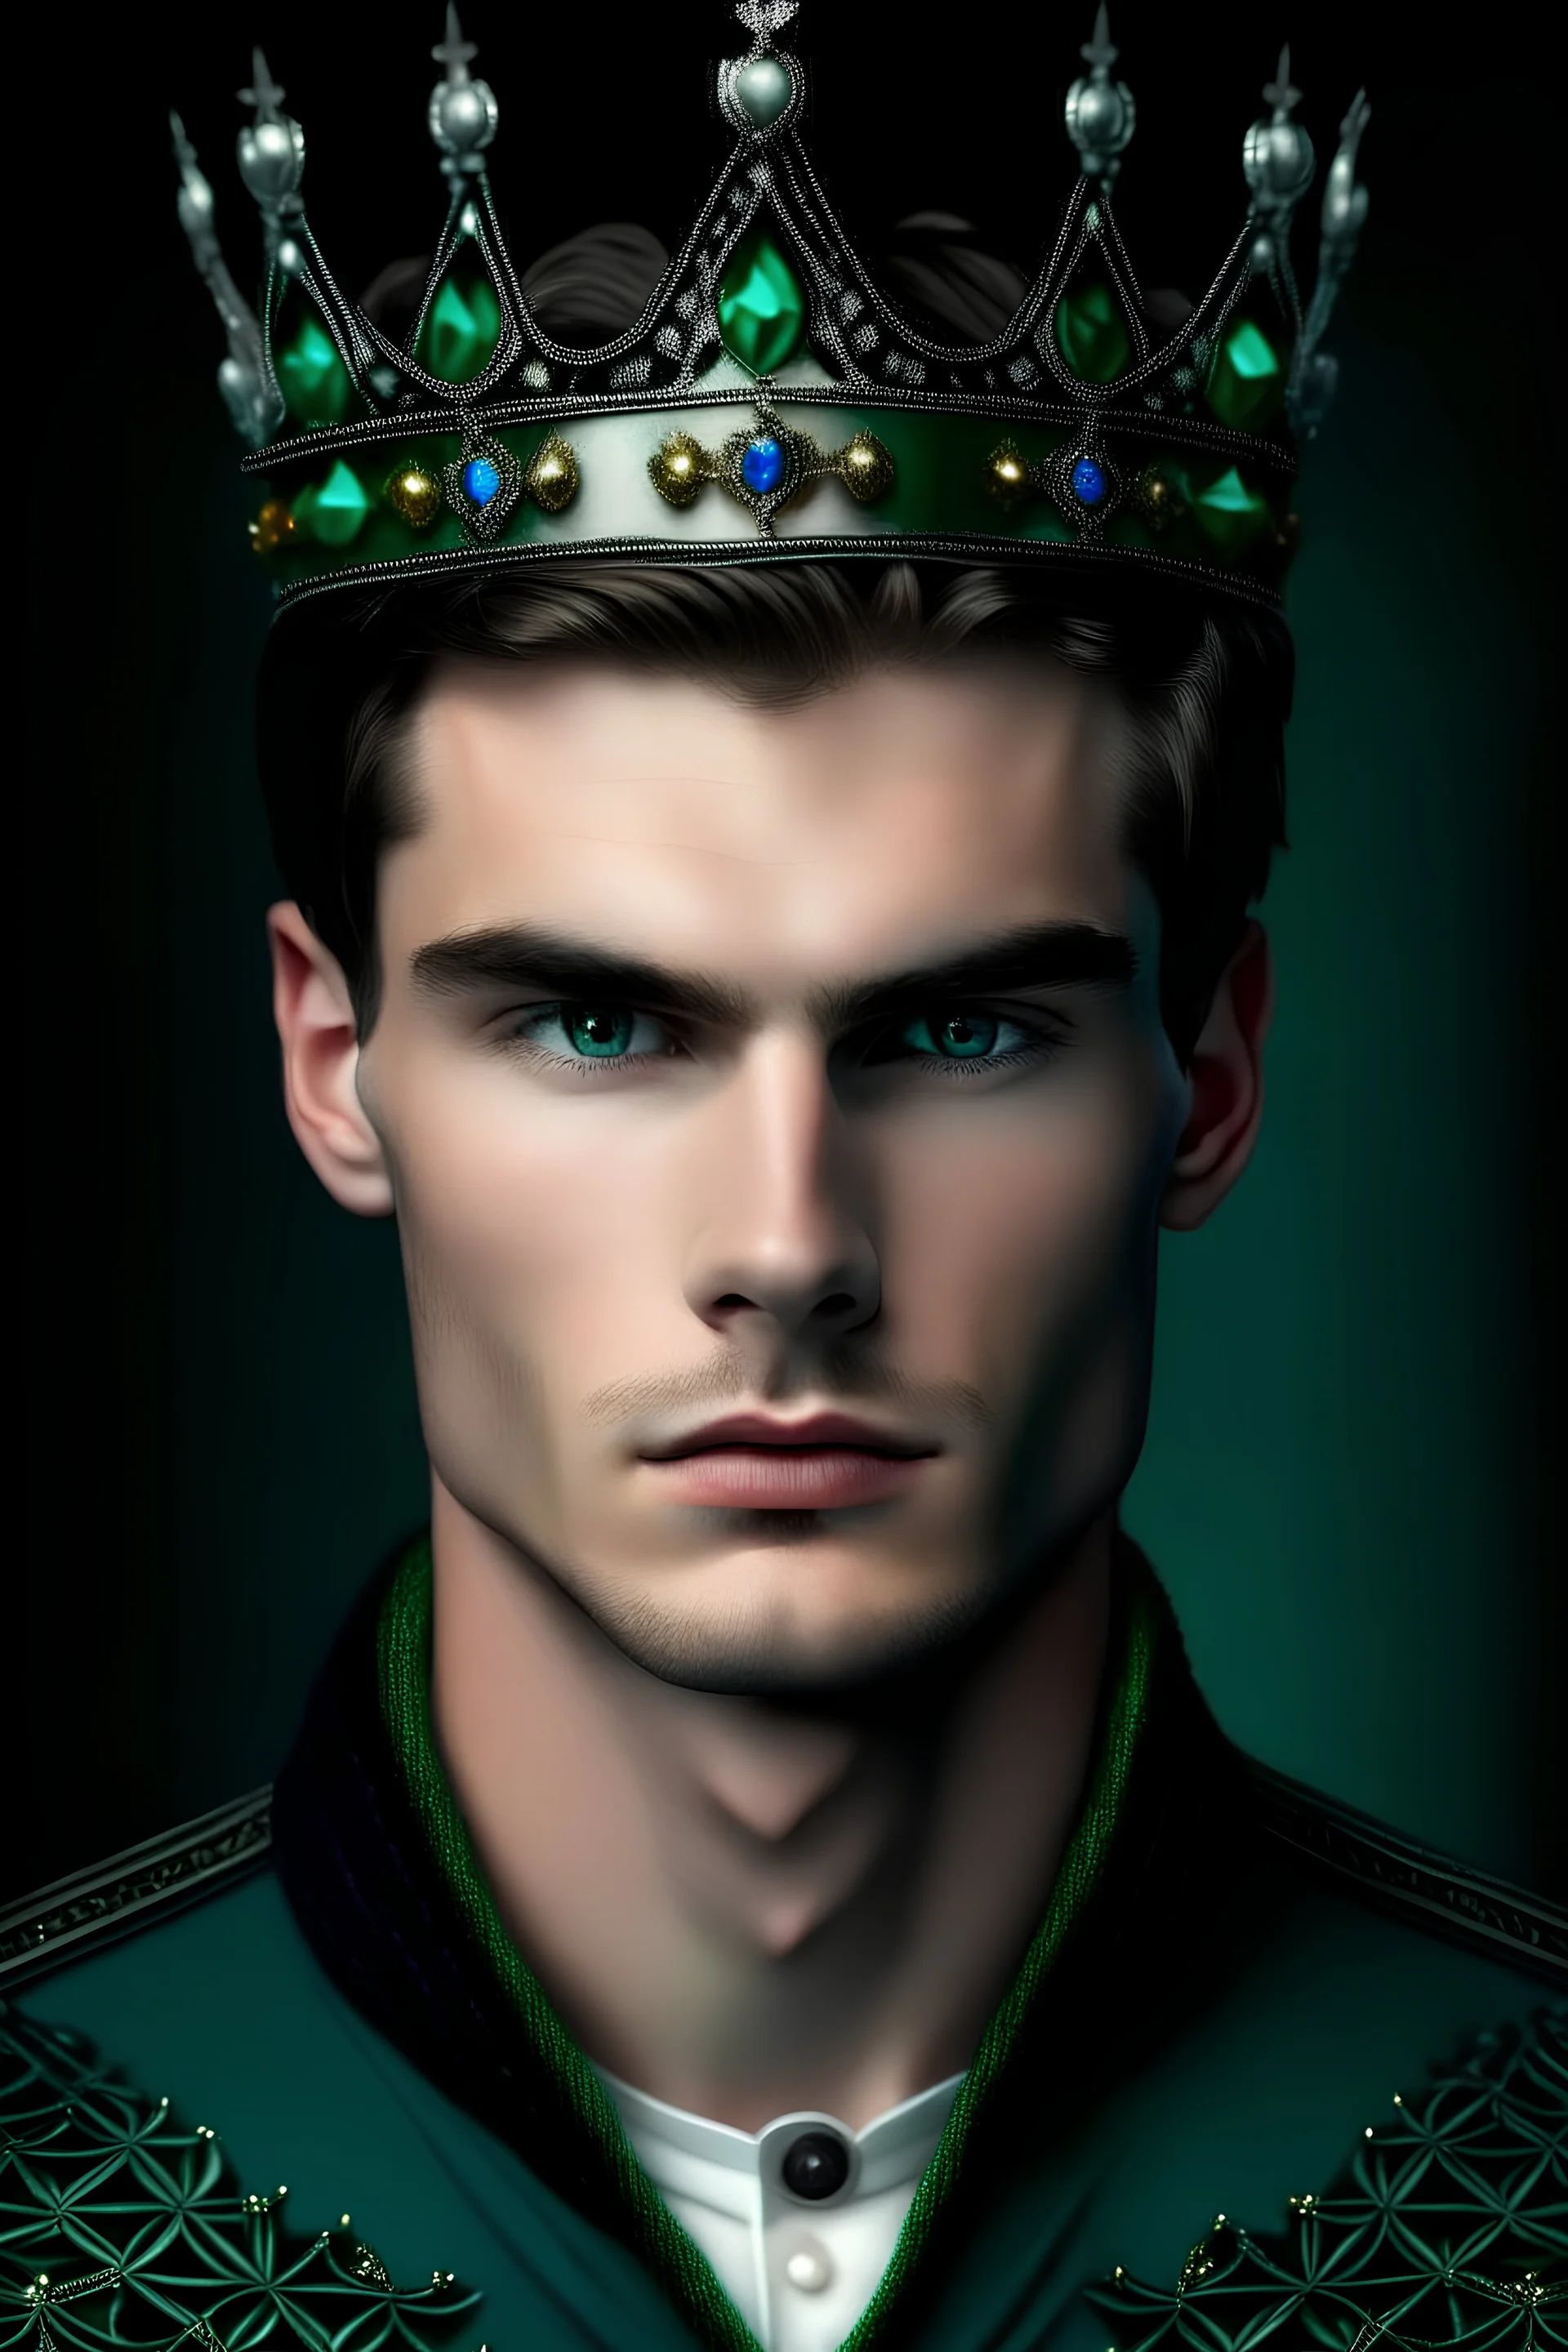 Handsome man with black hair and blue eyes, wearing a silver crown with emerald gem